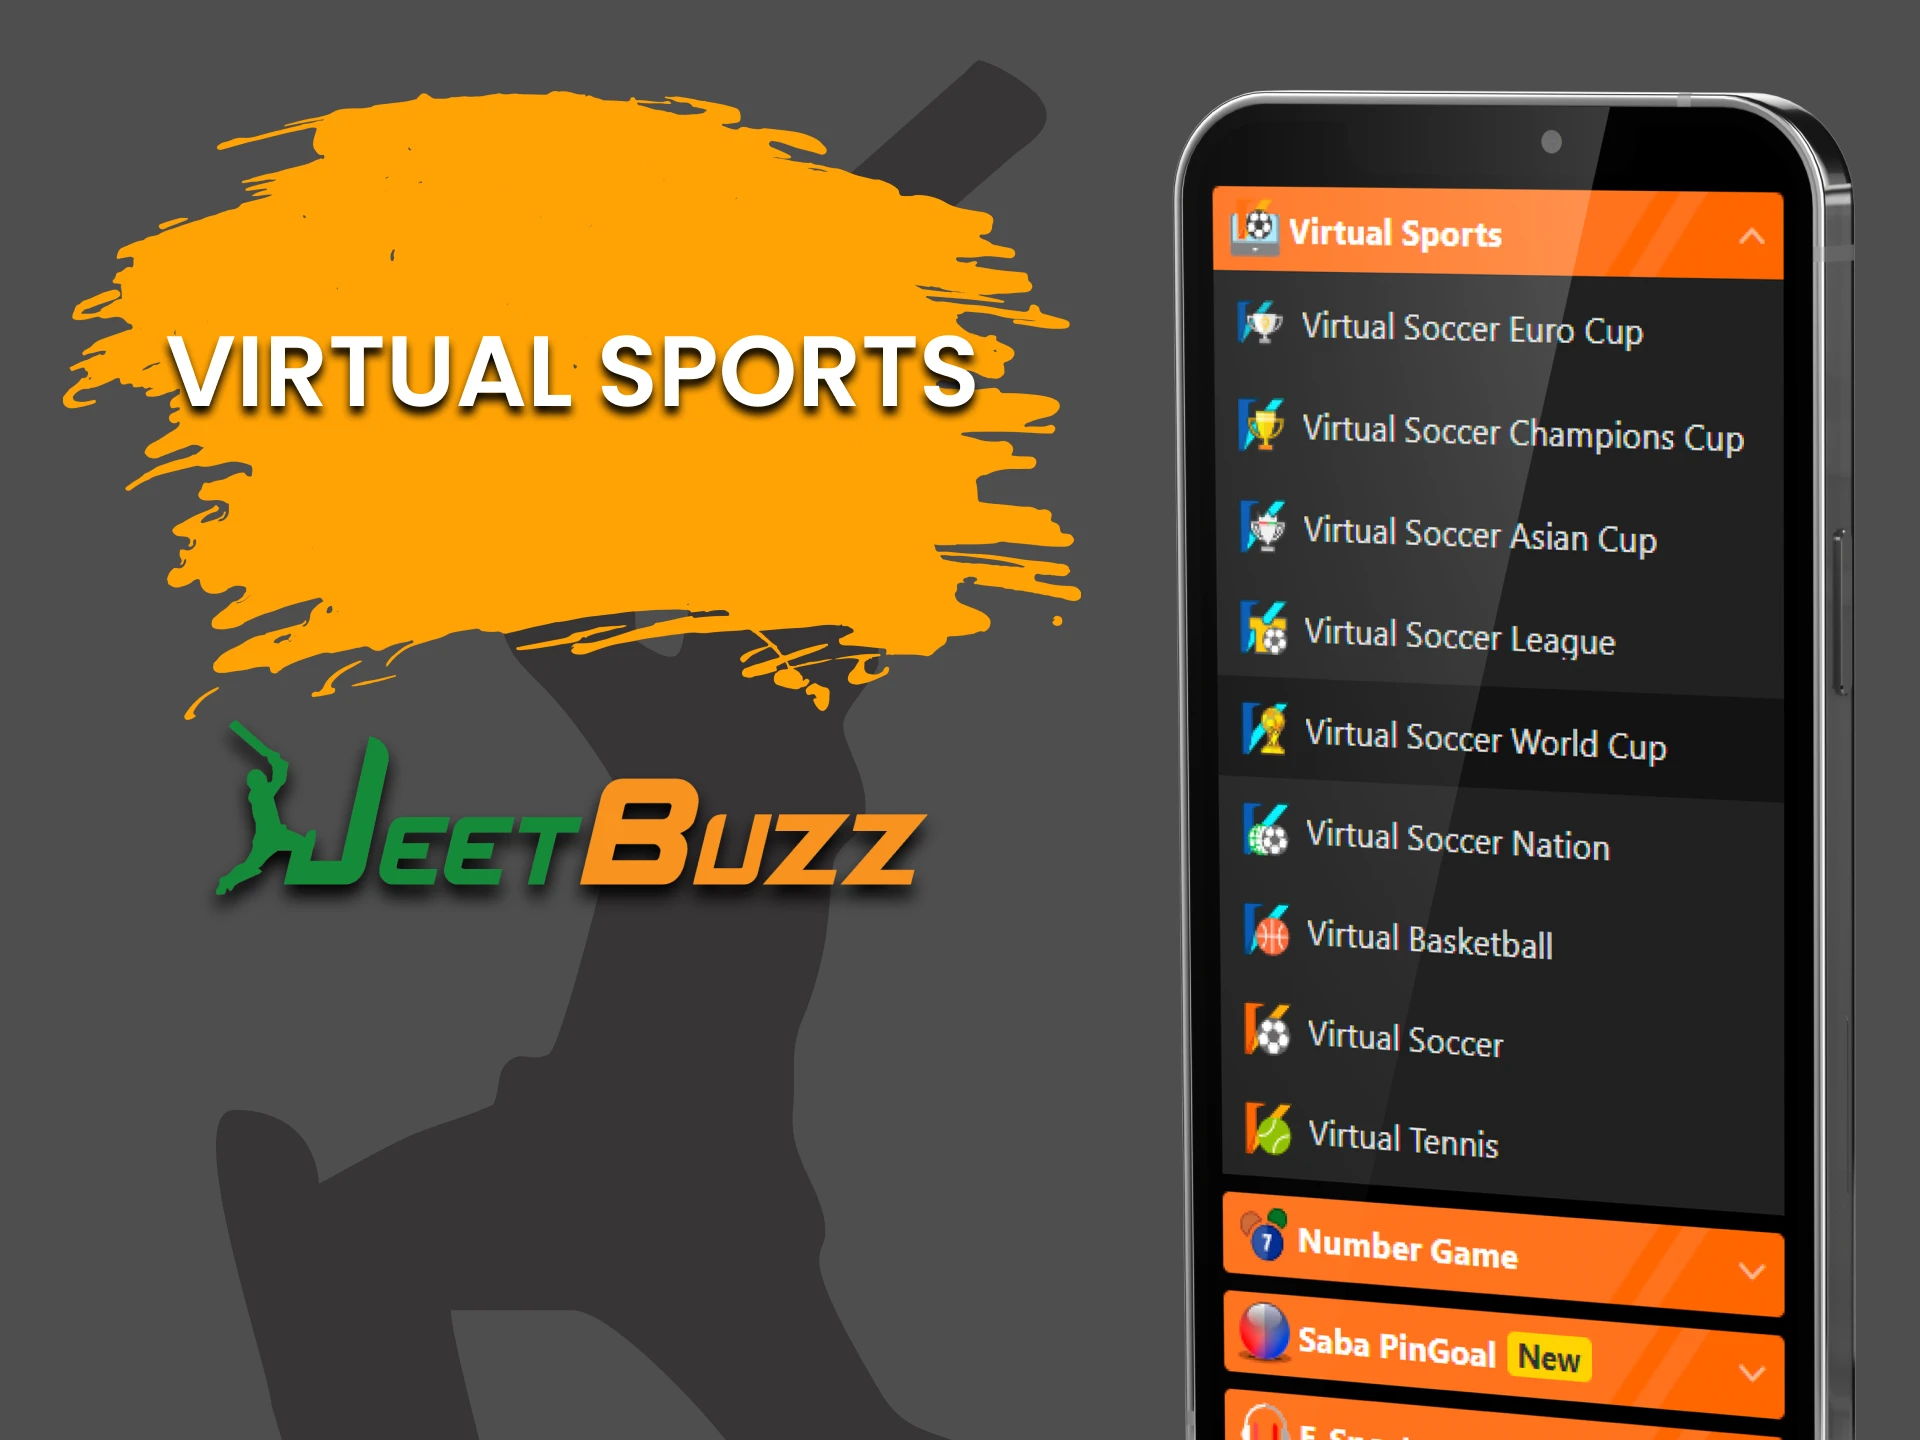 For virtual sports betting, choose the JeetBuzz app.